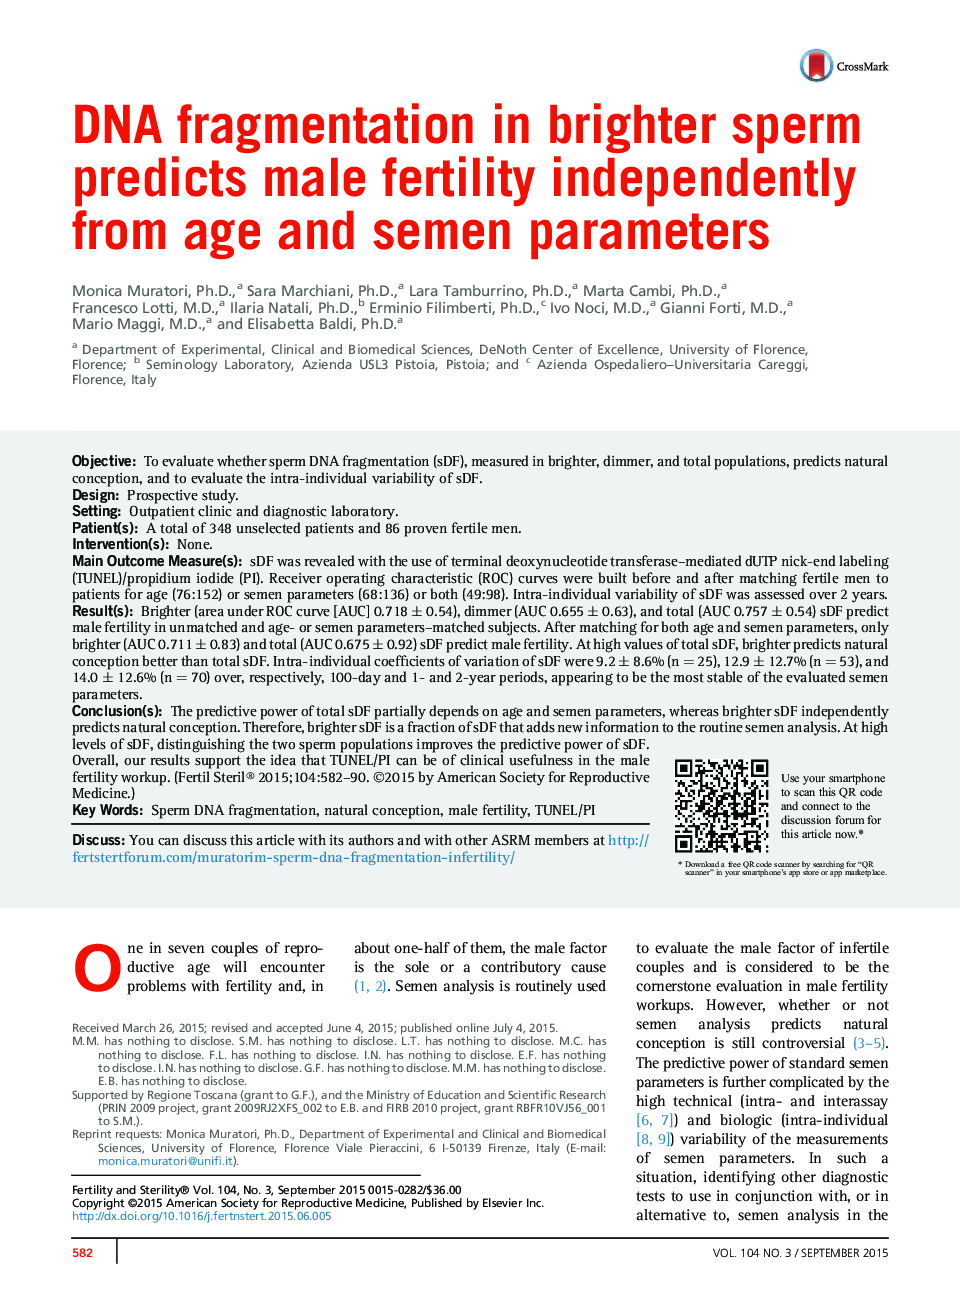 DNA fragmentation in brighter sperm predicts male fertility independently from age and semen parameters